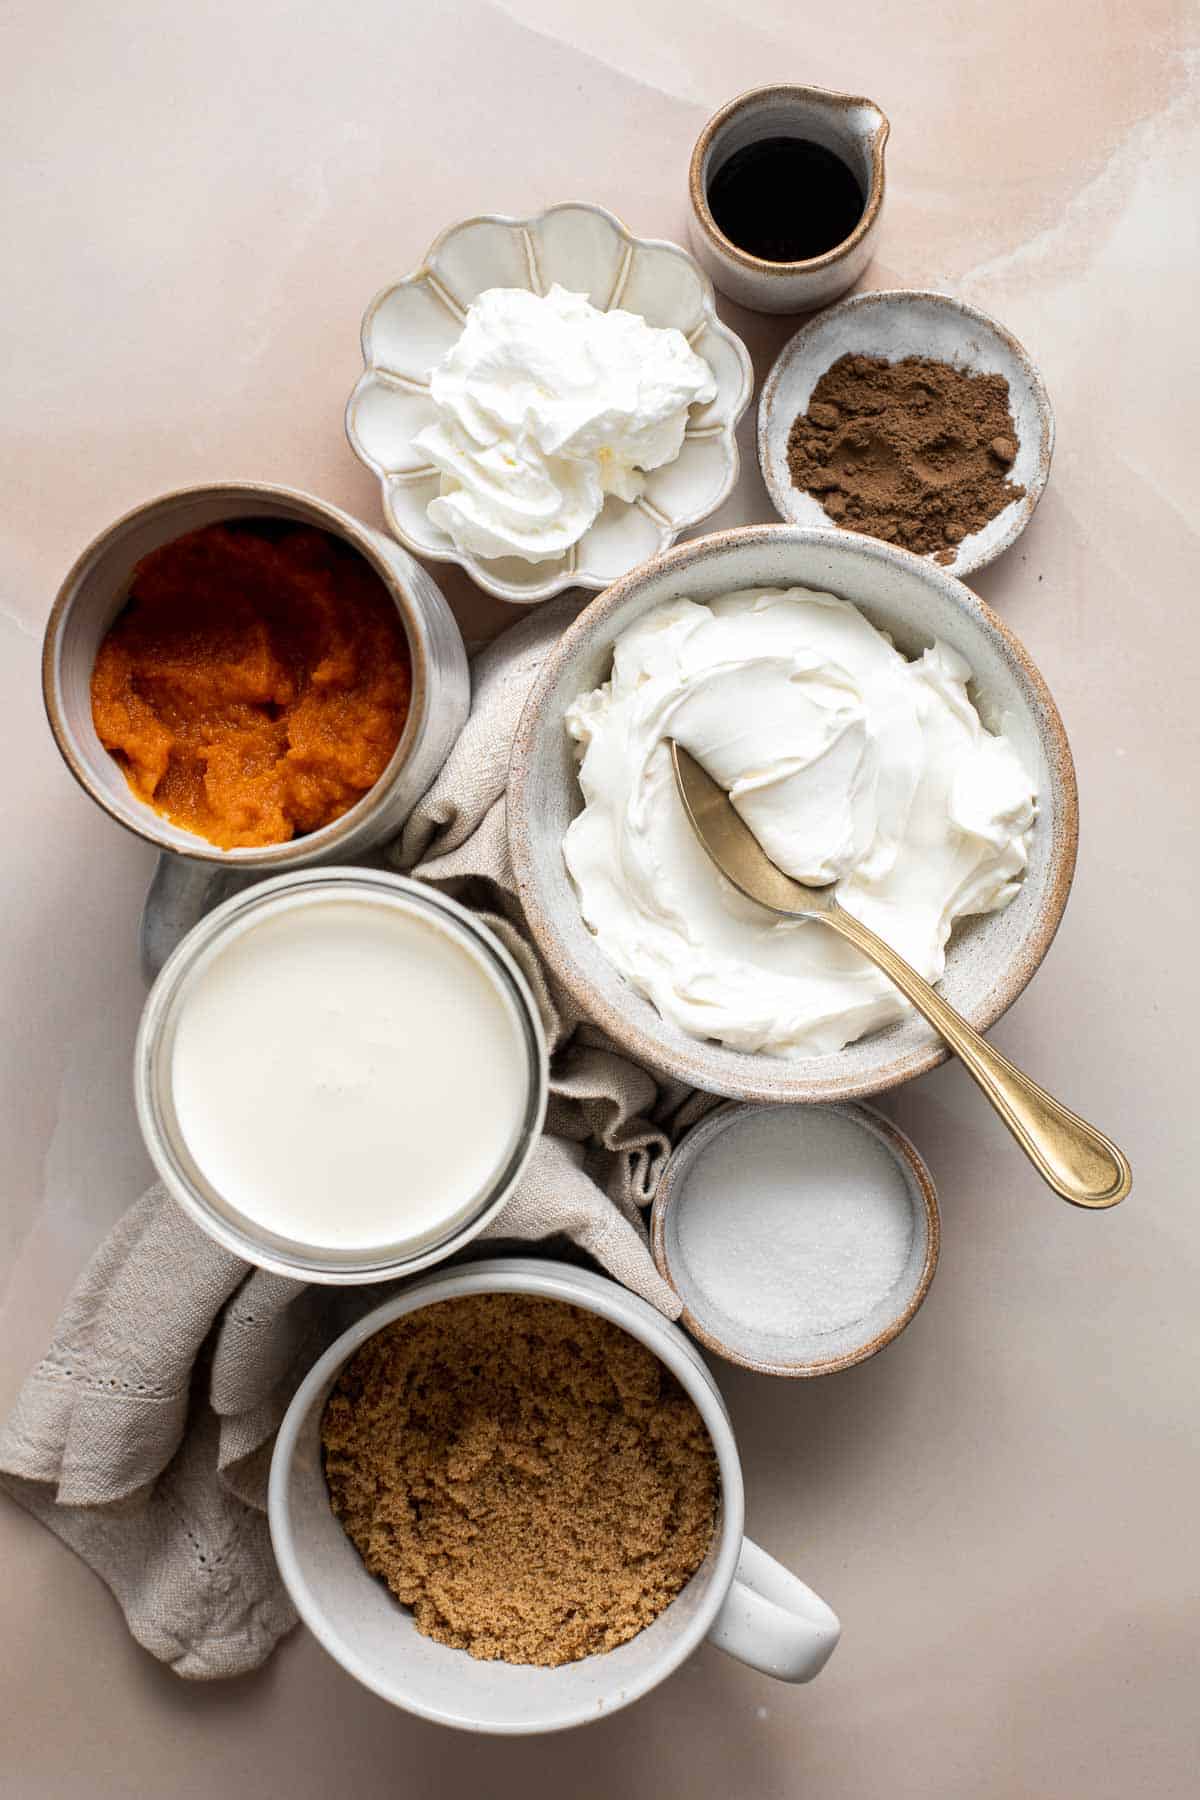 This rich, creamy pumpkin mousse is a fall dessert favorite. It’s beginner-friendly, no bake, and easy to whip up in 15 minutes before ready to chill. | aheadofthyme.com